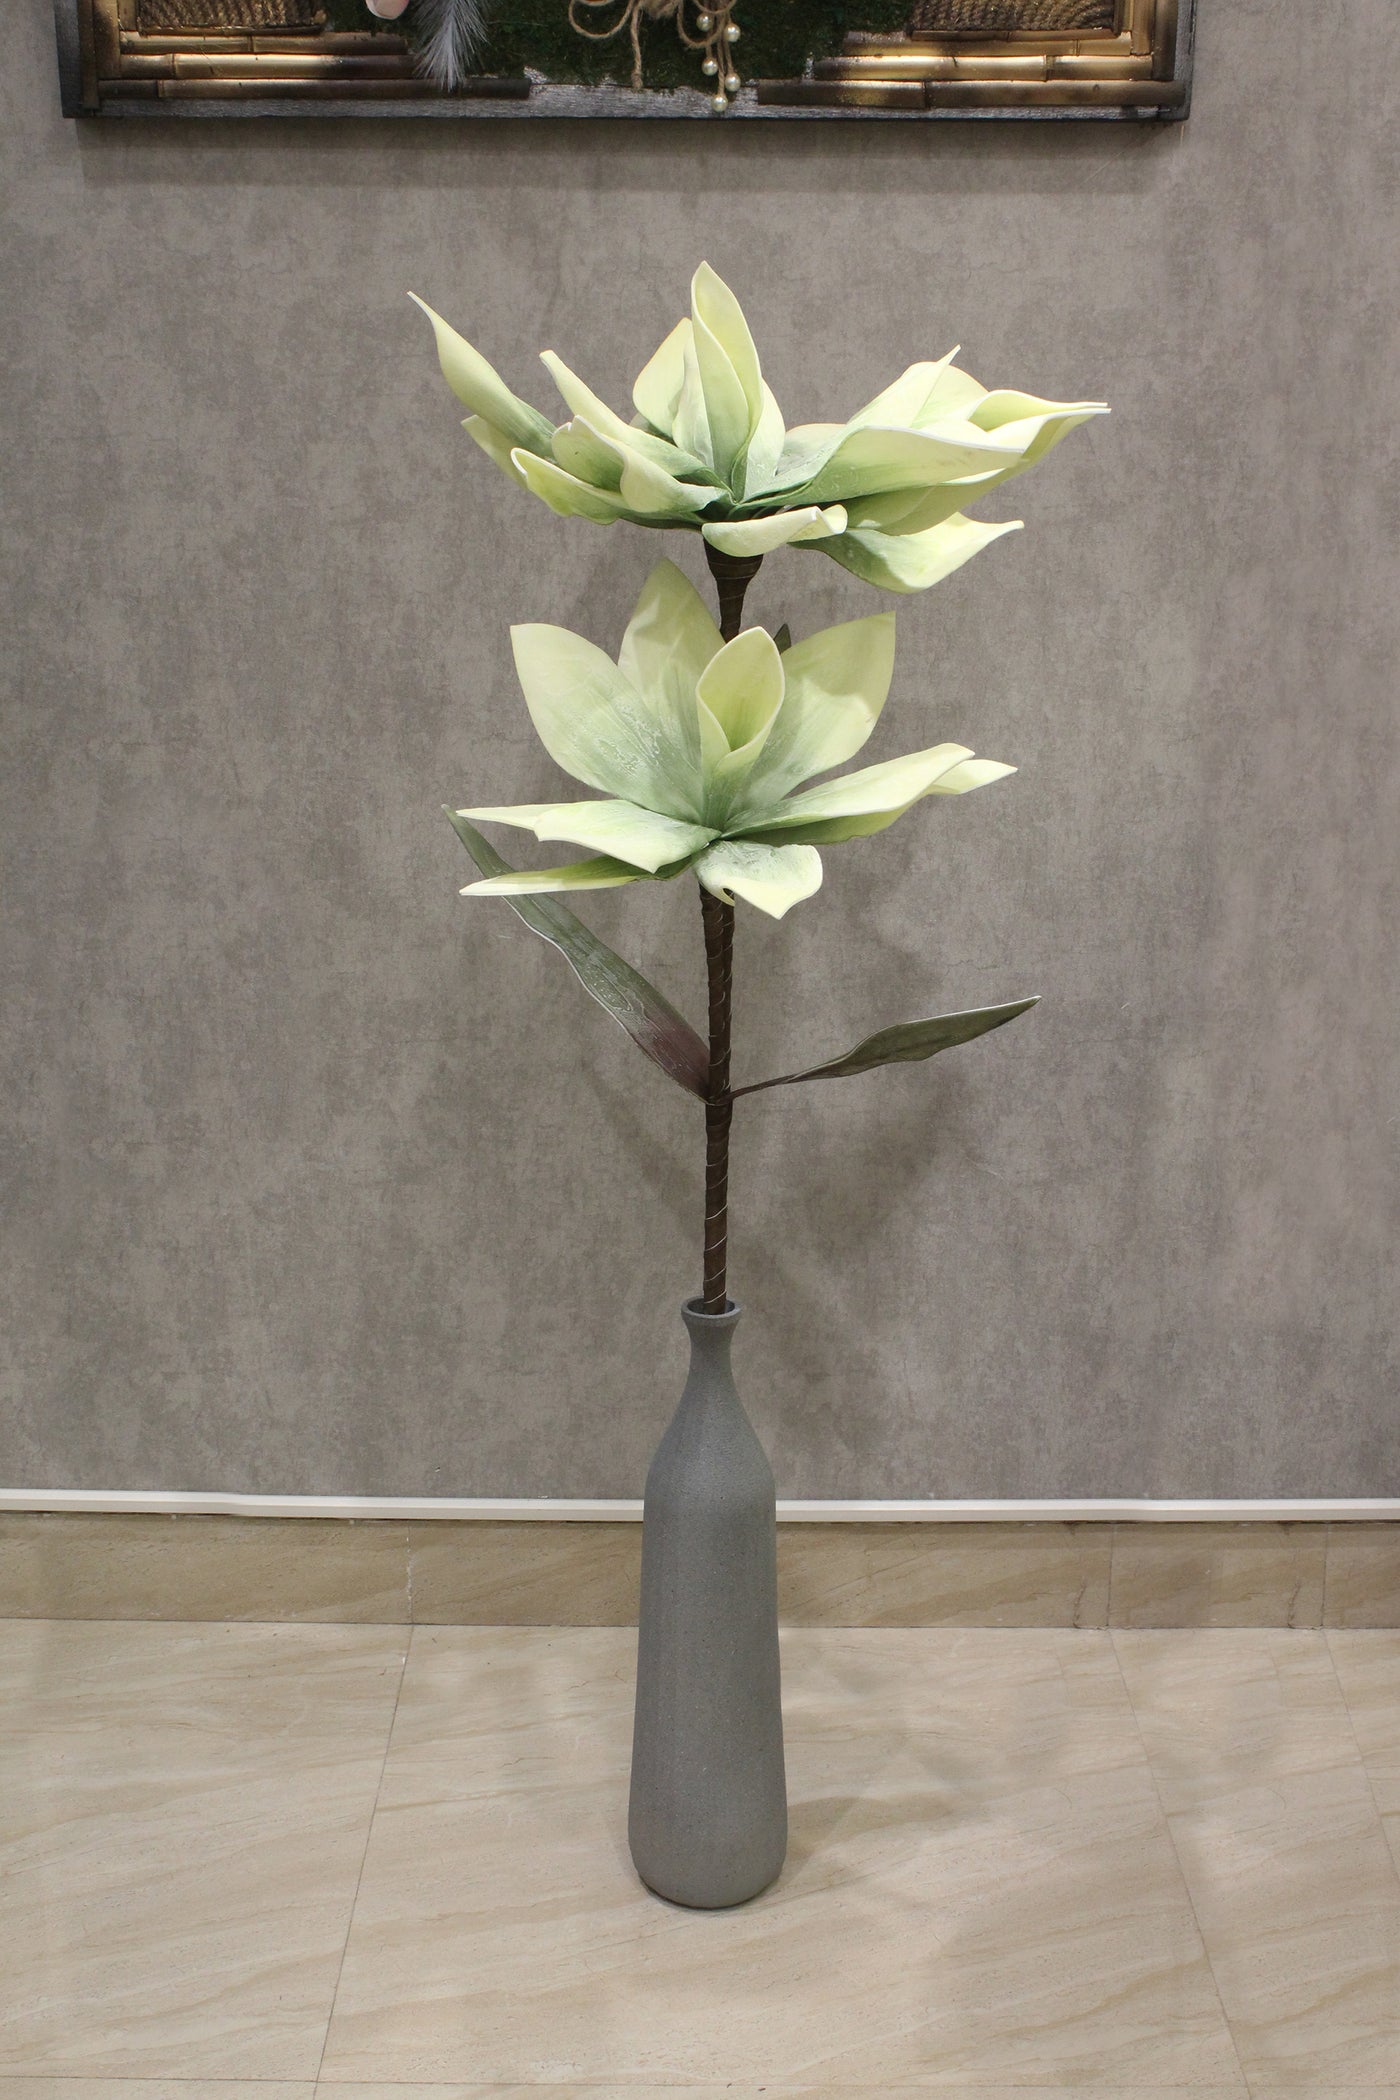 Artificial flower magnolia foam flower for your Home or Office Decor